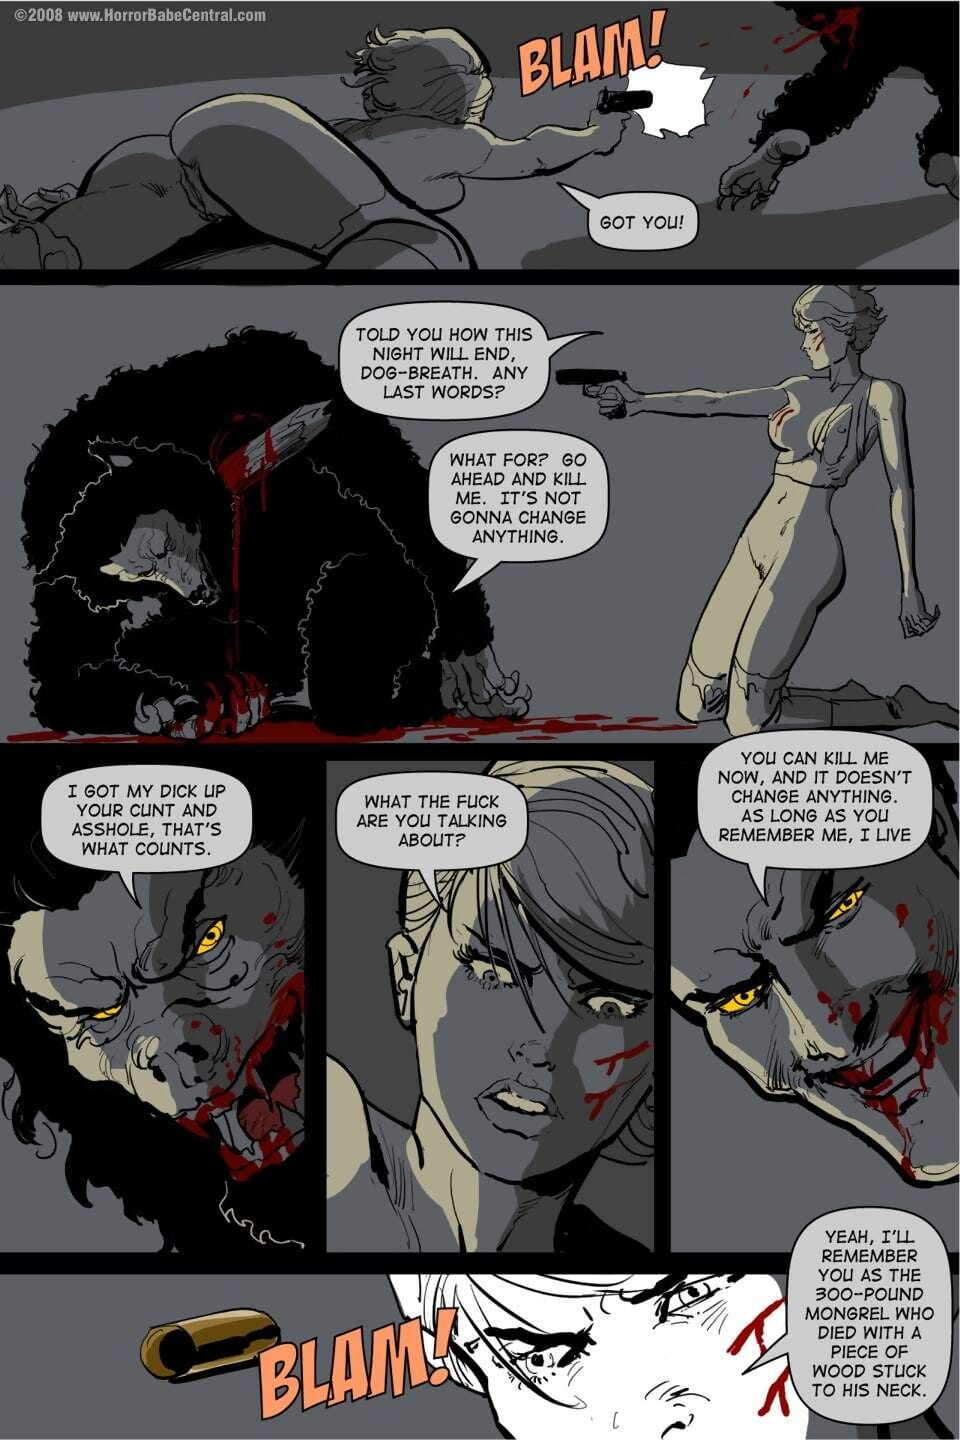 Vampire City - part 3 page 1